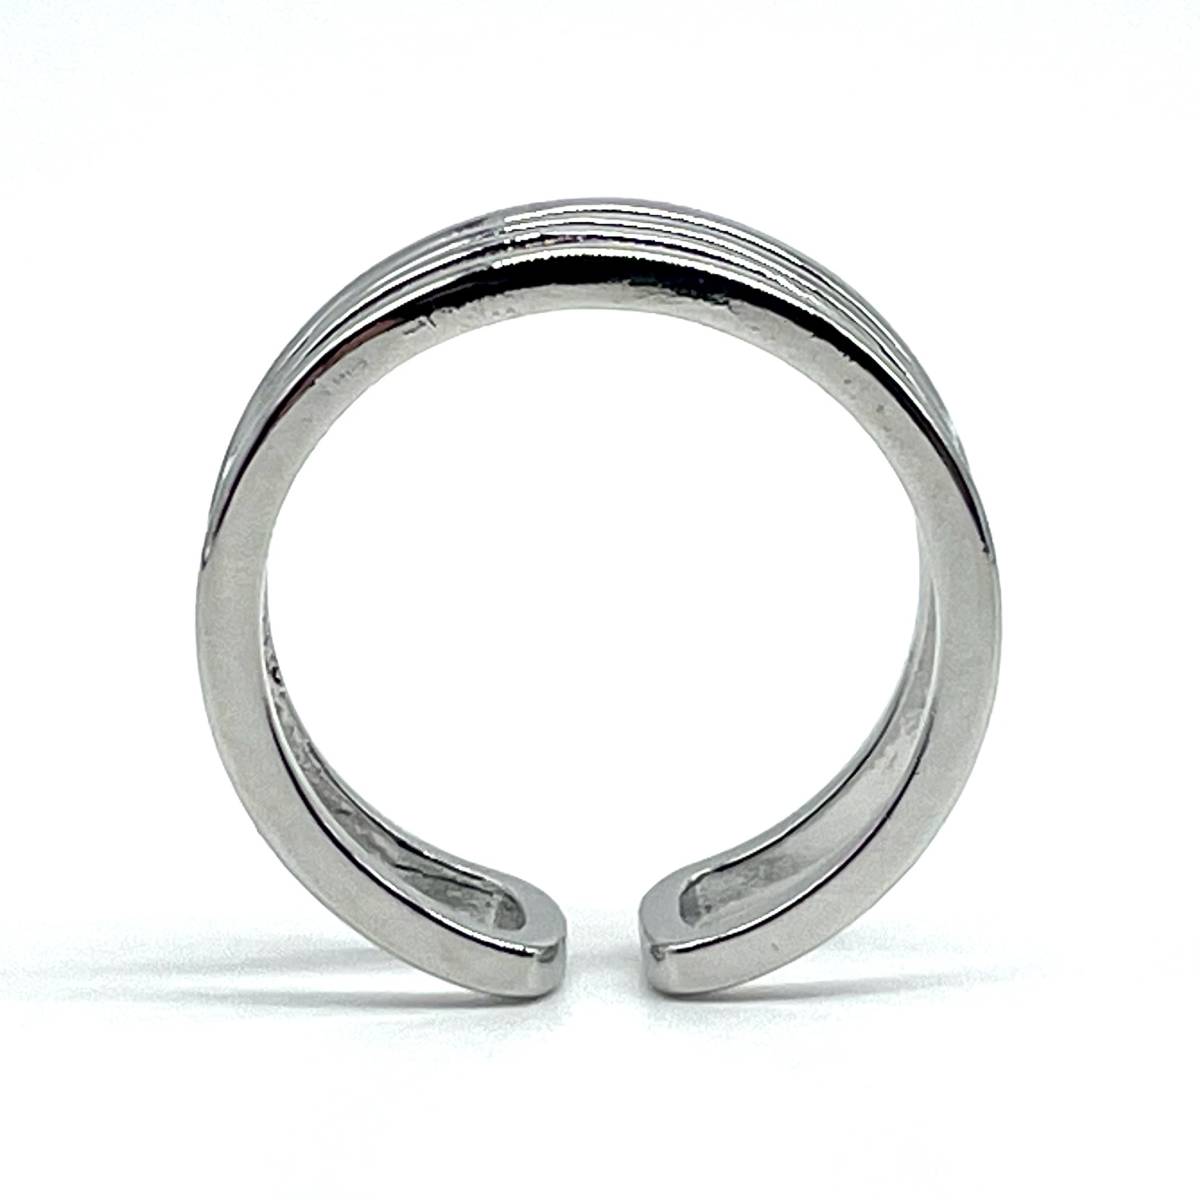  design open ring * ring men's silver silver 16 number new goods unused ring silver ring casual mode Korea [PN261-1]